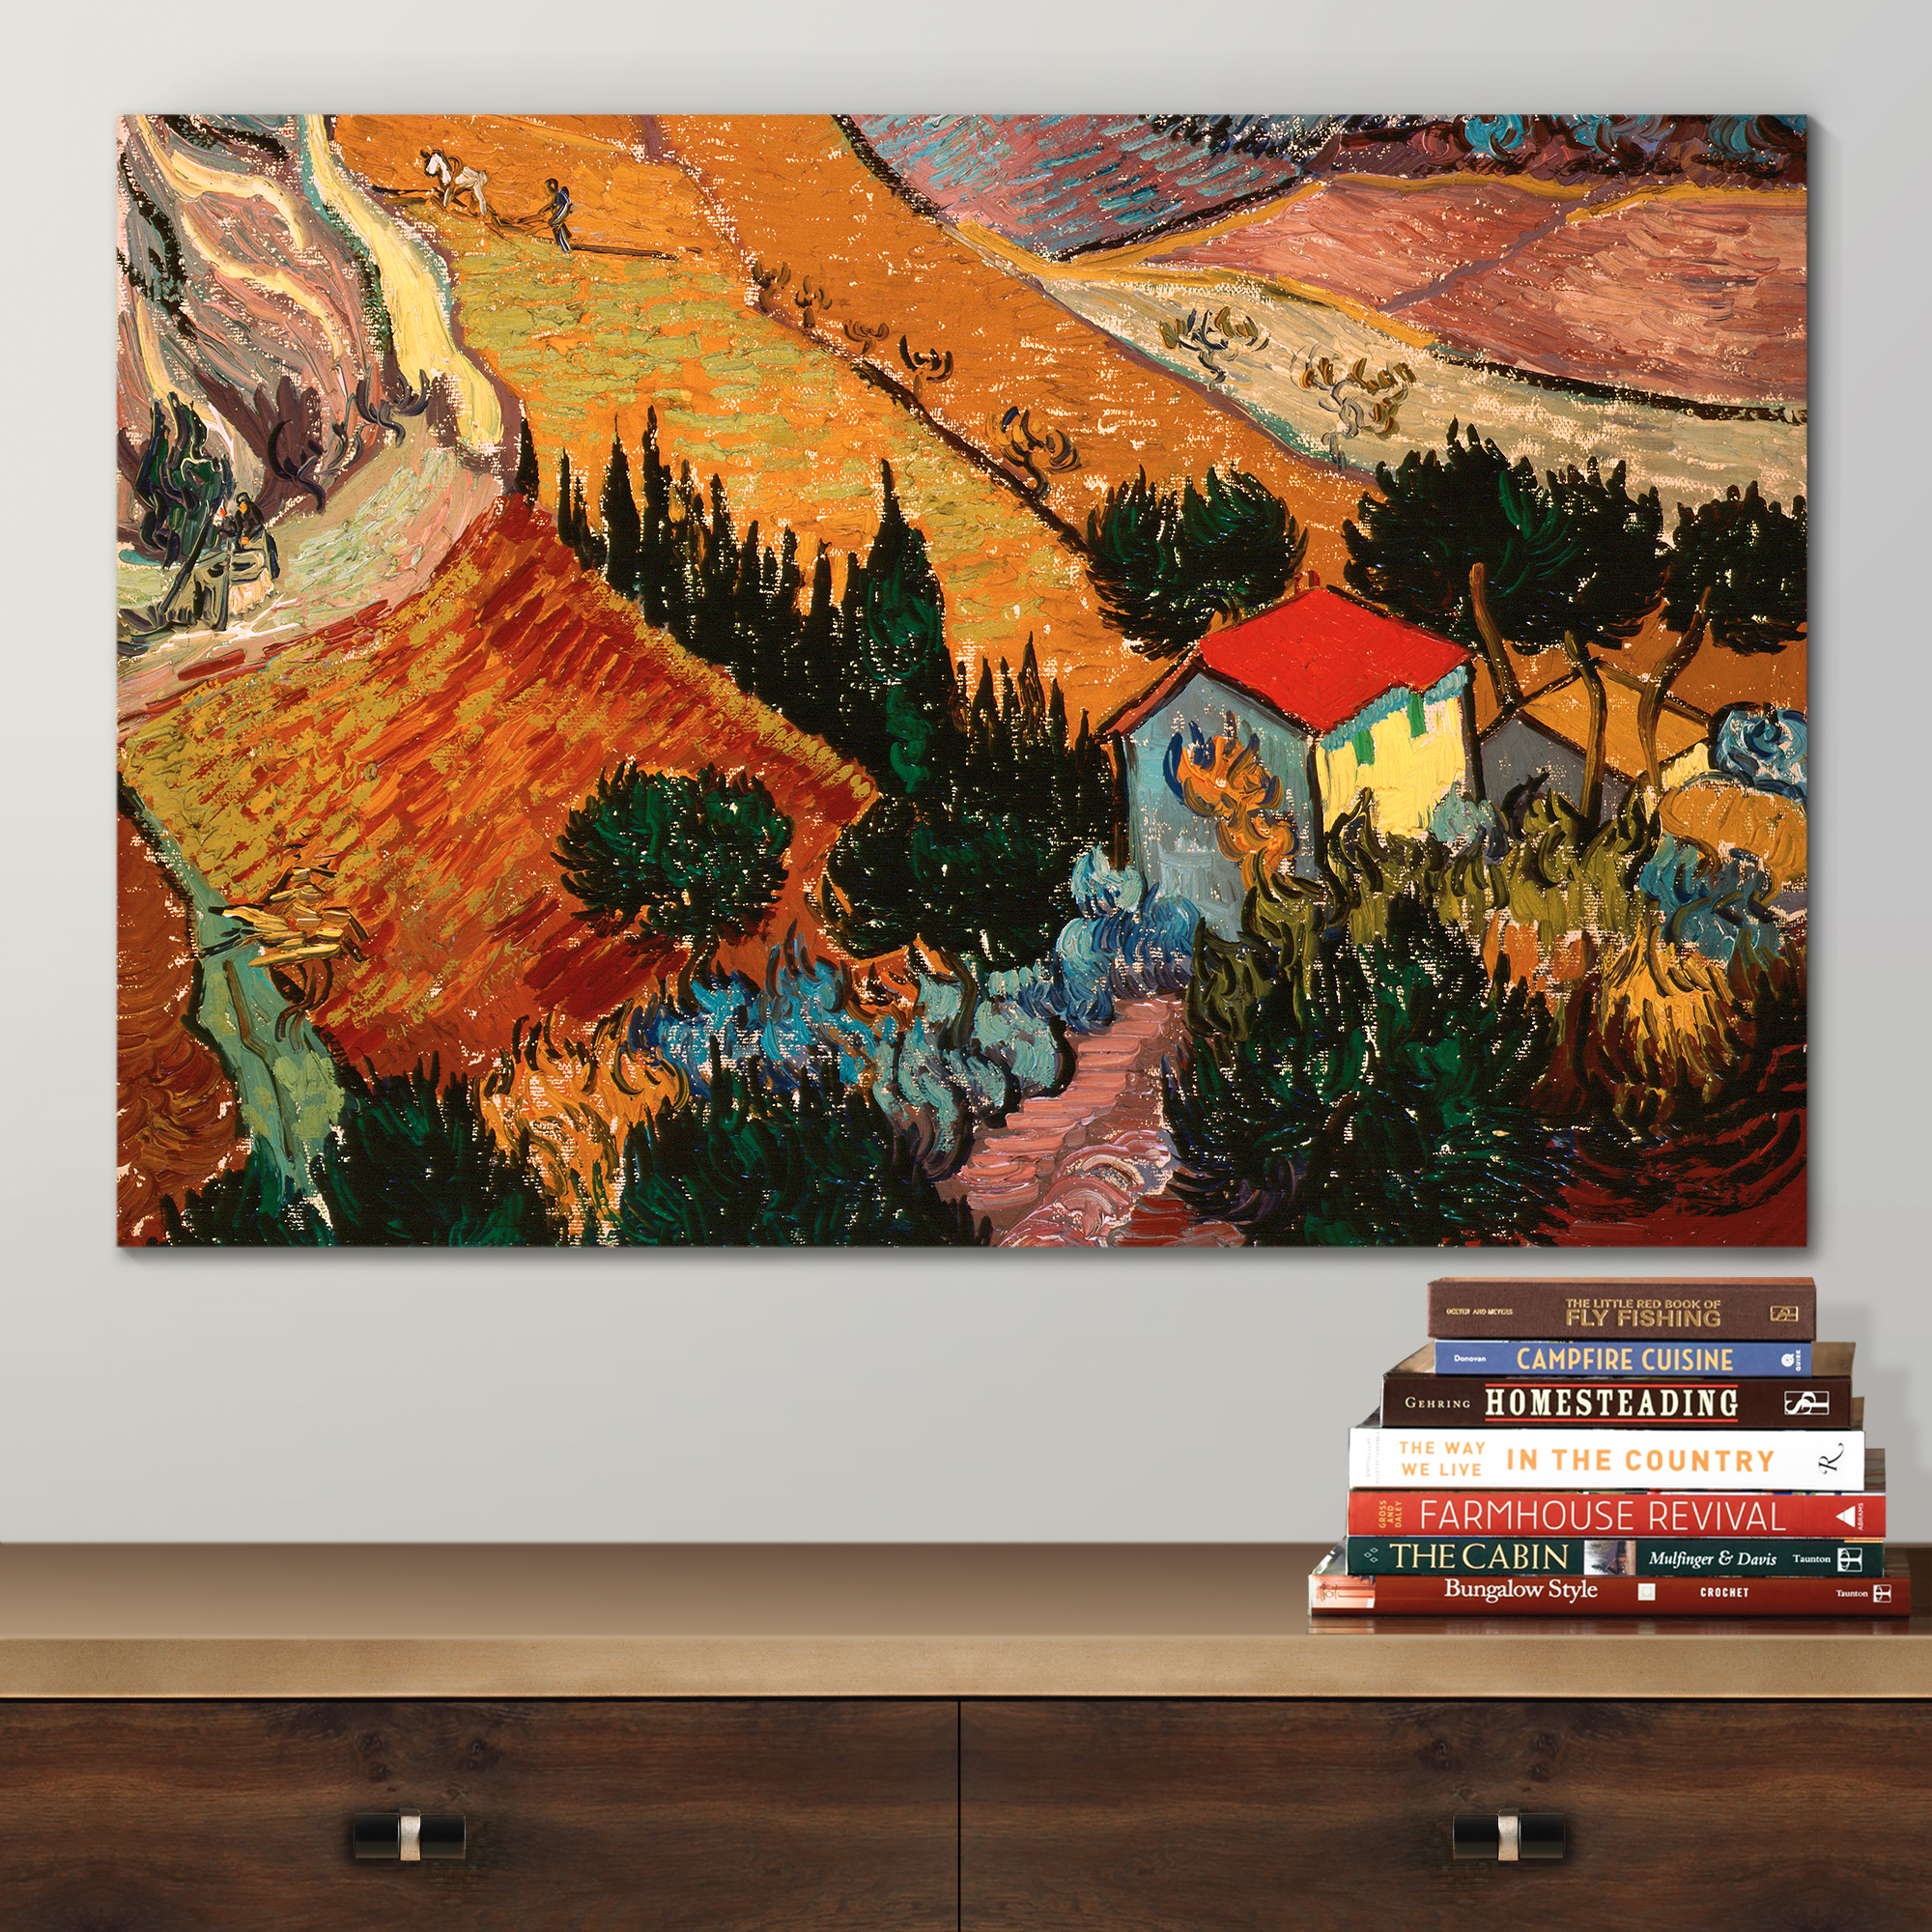 Valley with Ploughman Seen from Above by Vincent Van Gogh - Canvas Print Wall Art Famous Painting Reproduction - 12